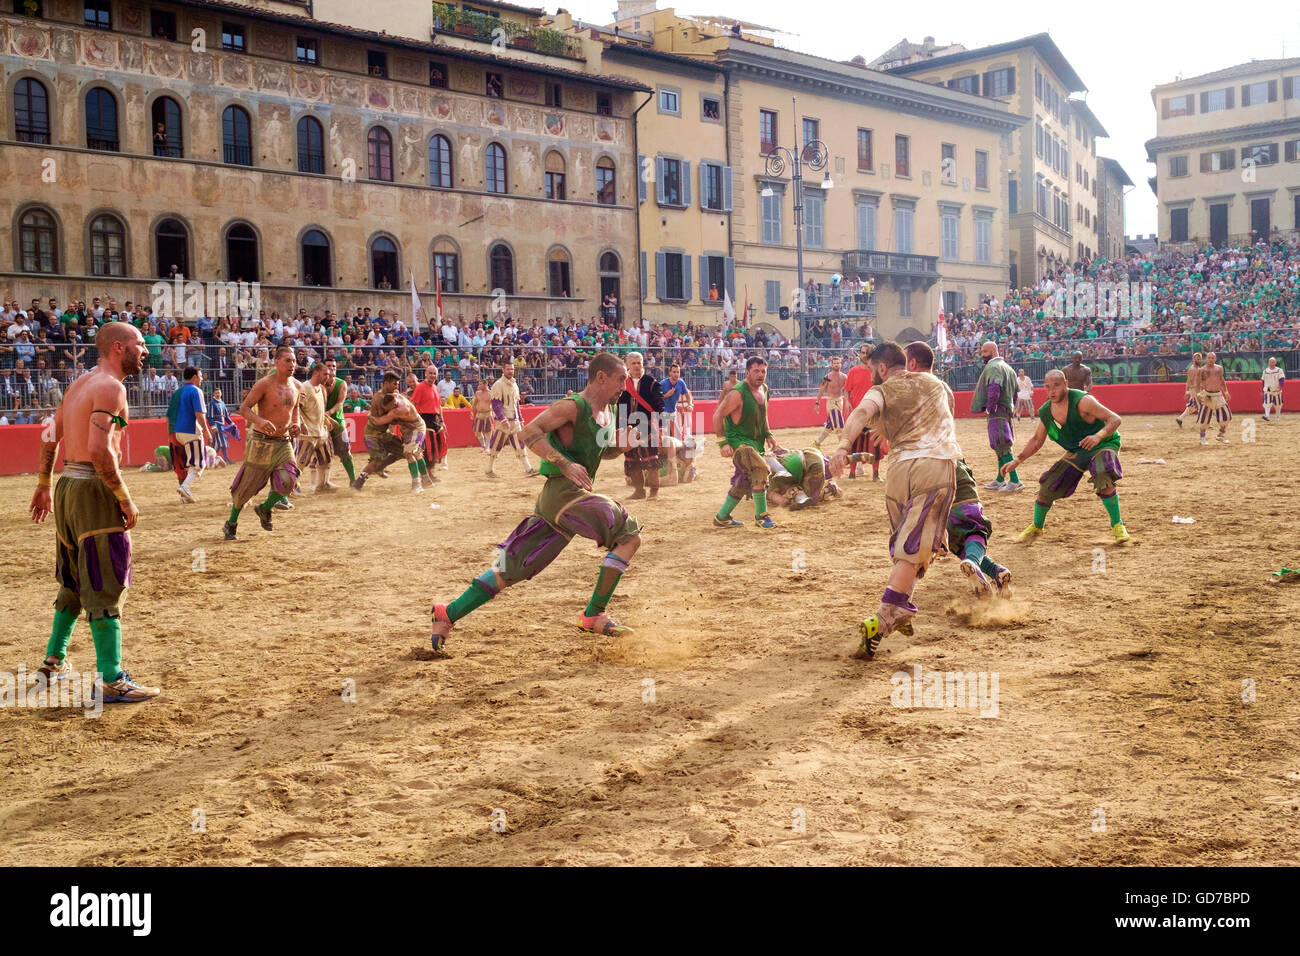 Florentine soccer match in Florence Stock Photo